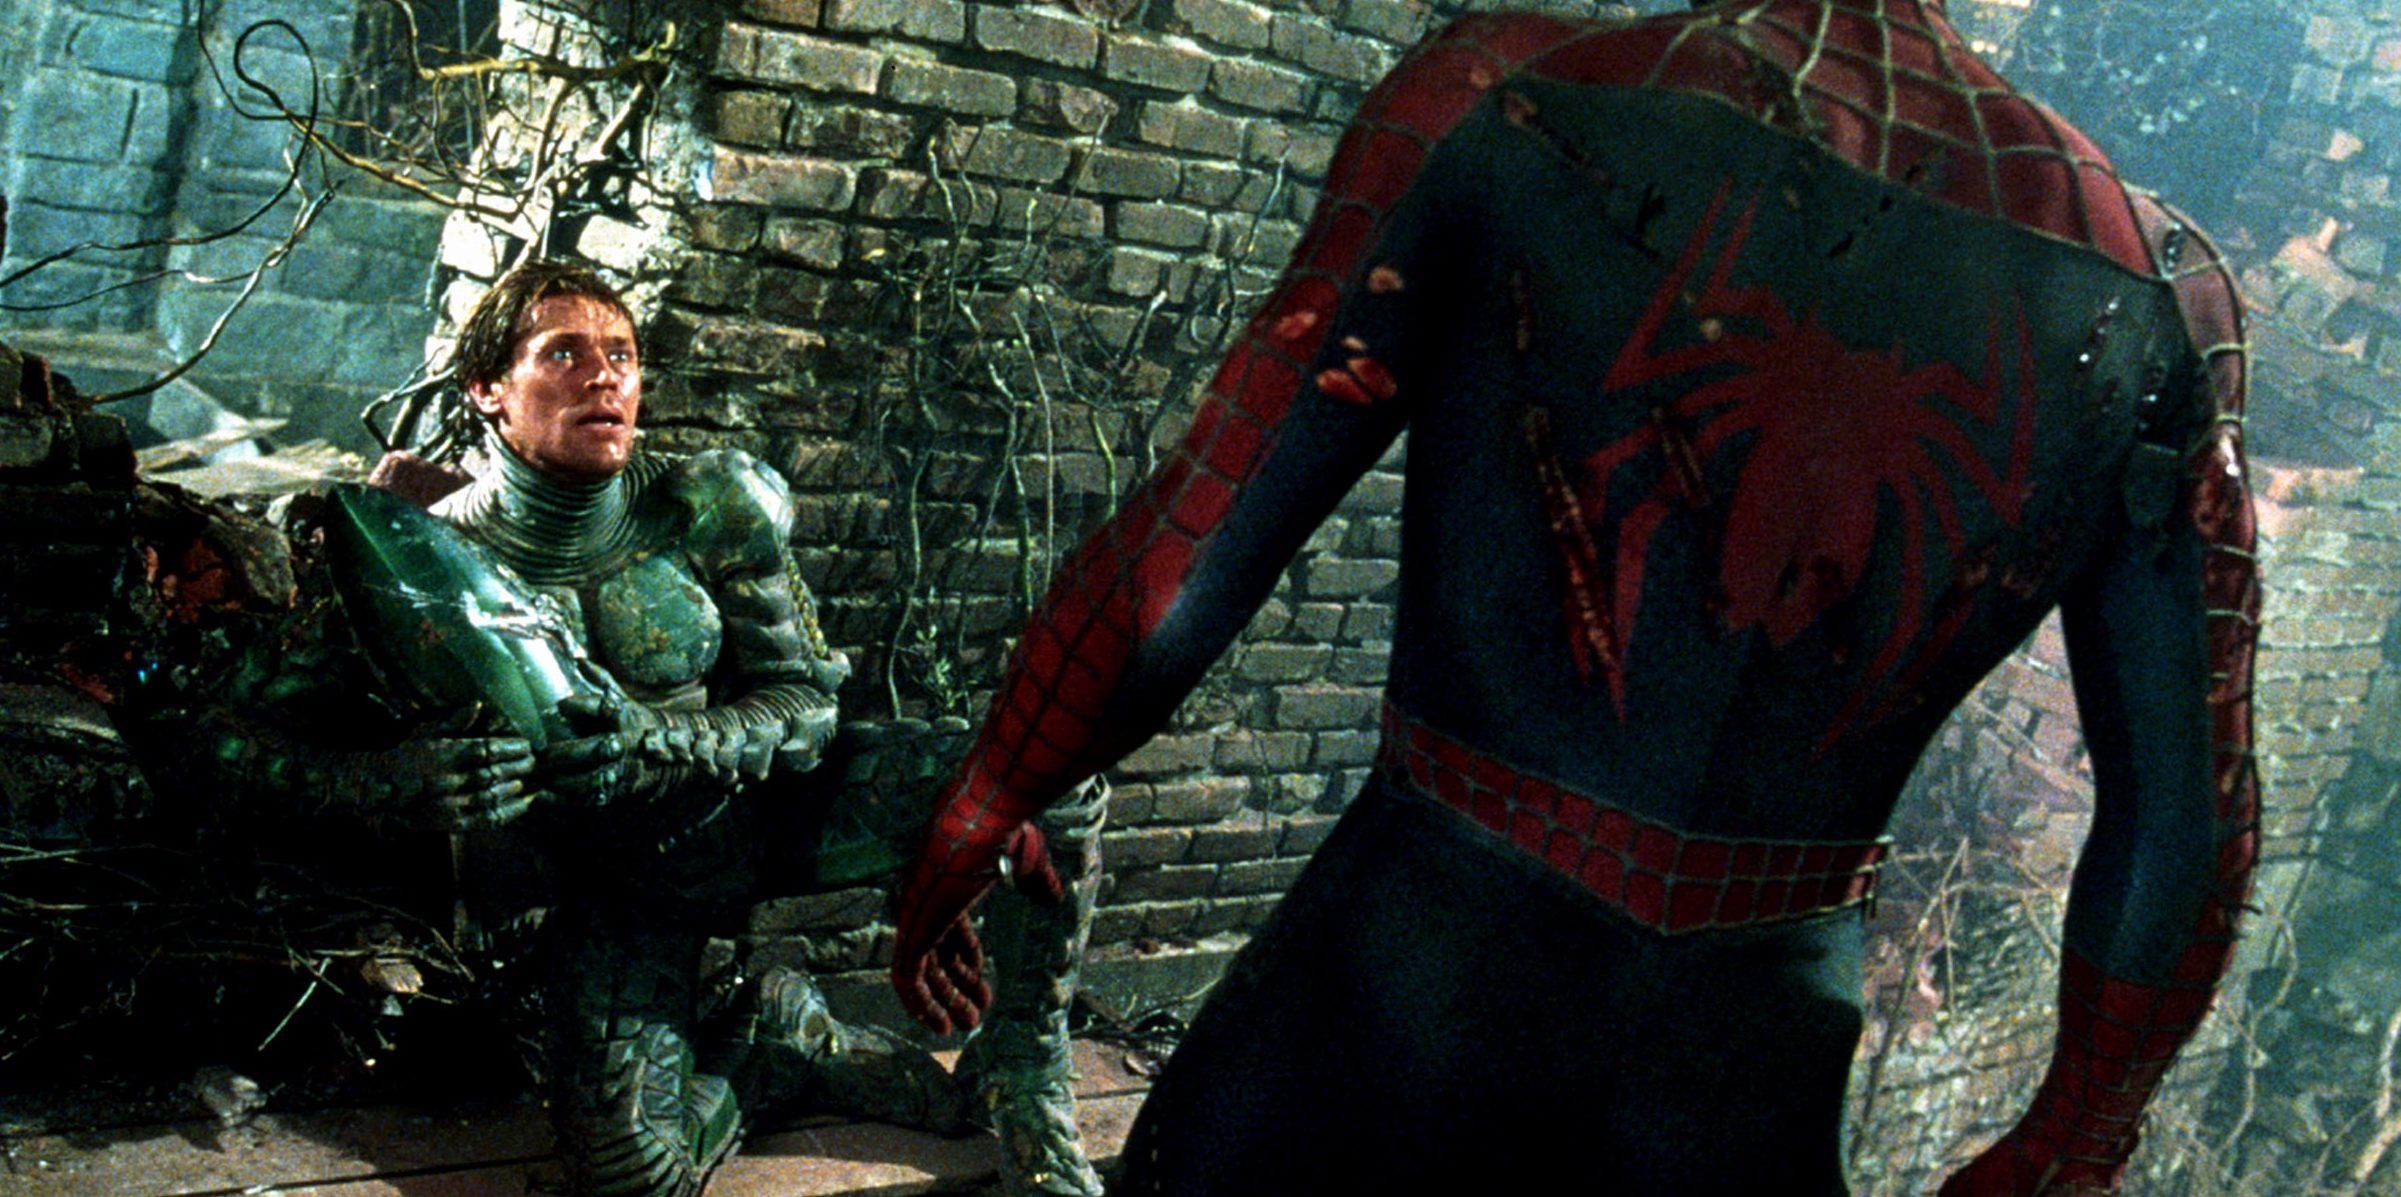 The 10 Best SpiderMan Movie Fight Scenes Ranked